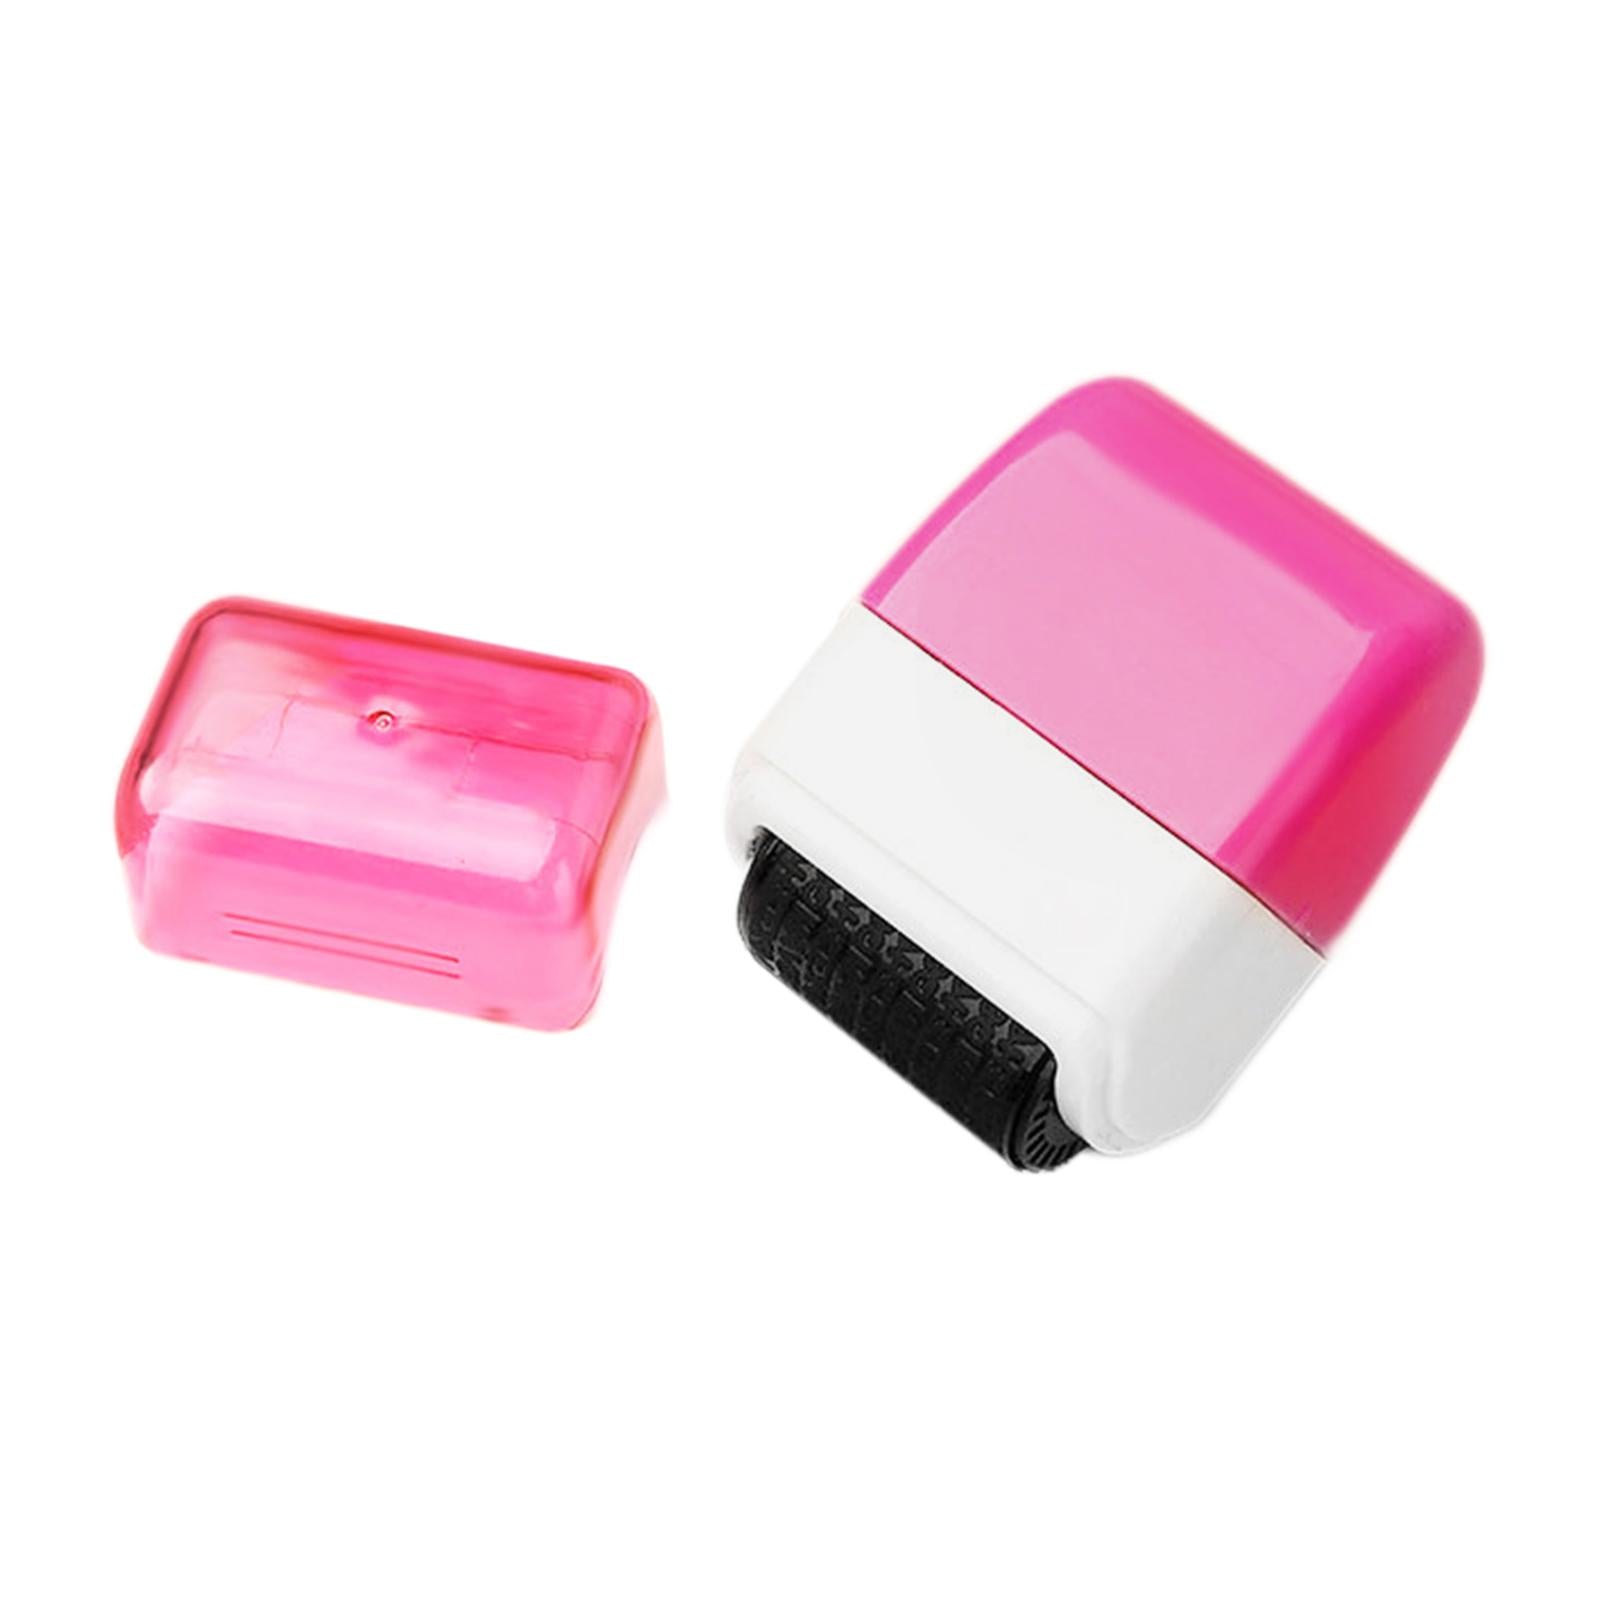 Protection Privacy Data Roller Stamp Seal Defend ID Information Security Pink